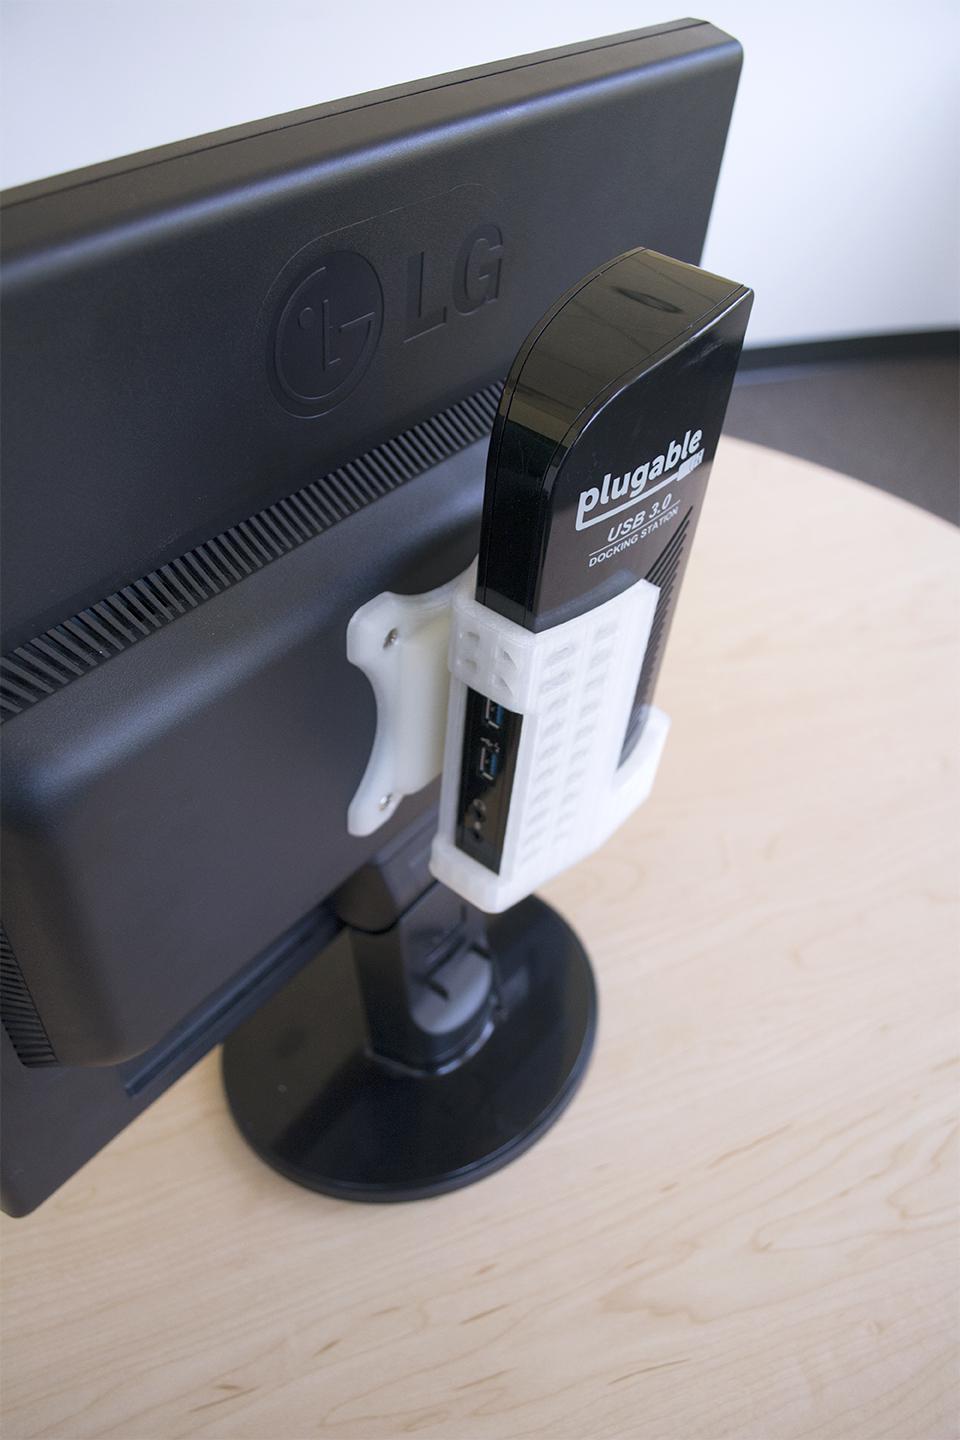 Mounting the UD-3900 to the back of the monitor frees up desk space